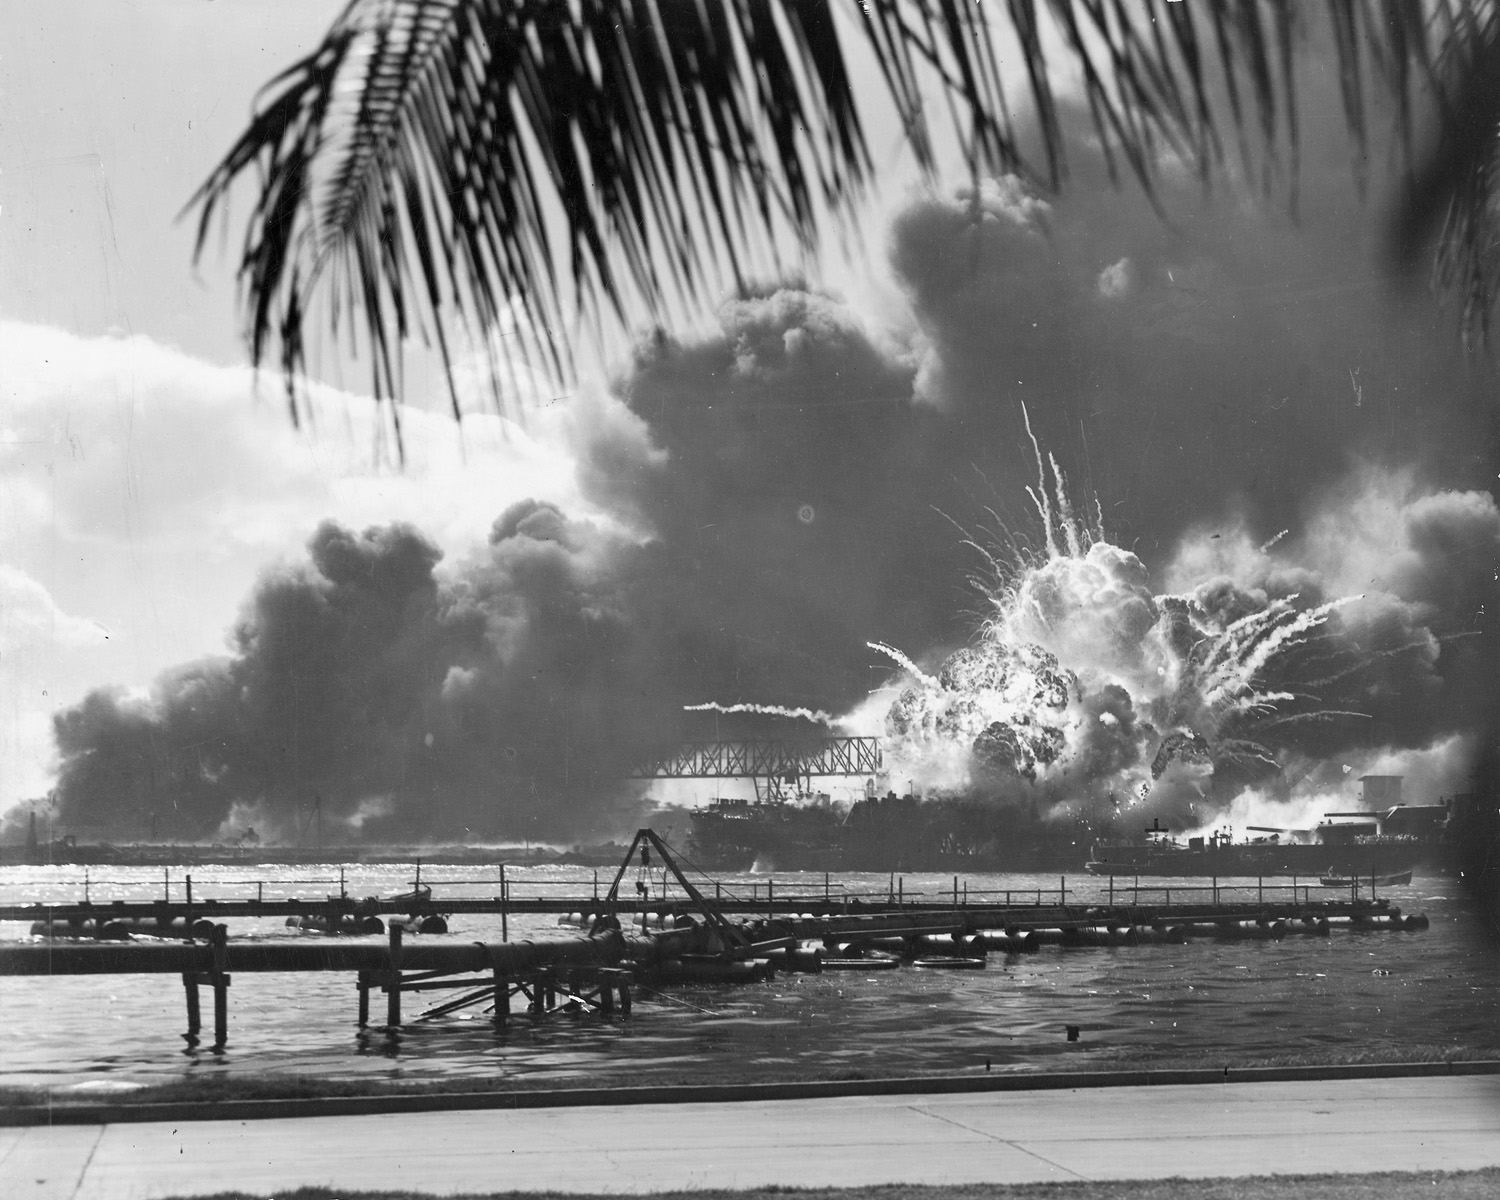 http://www.archives.gov/publications/prologue/2004/winter/images/pearl-harbor.jpg